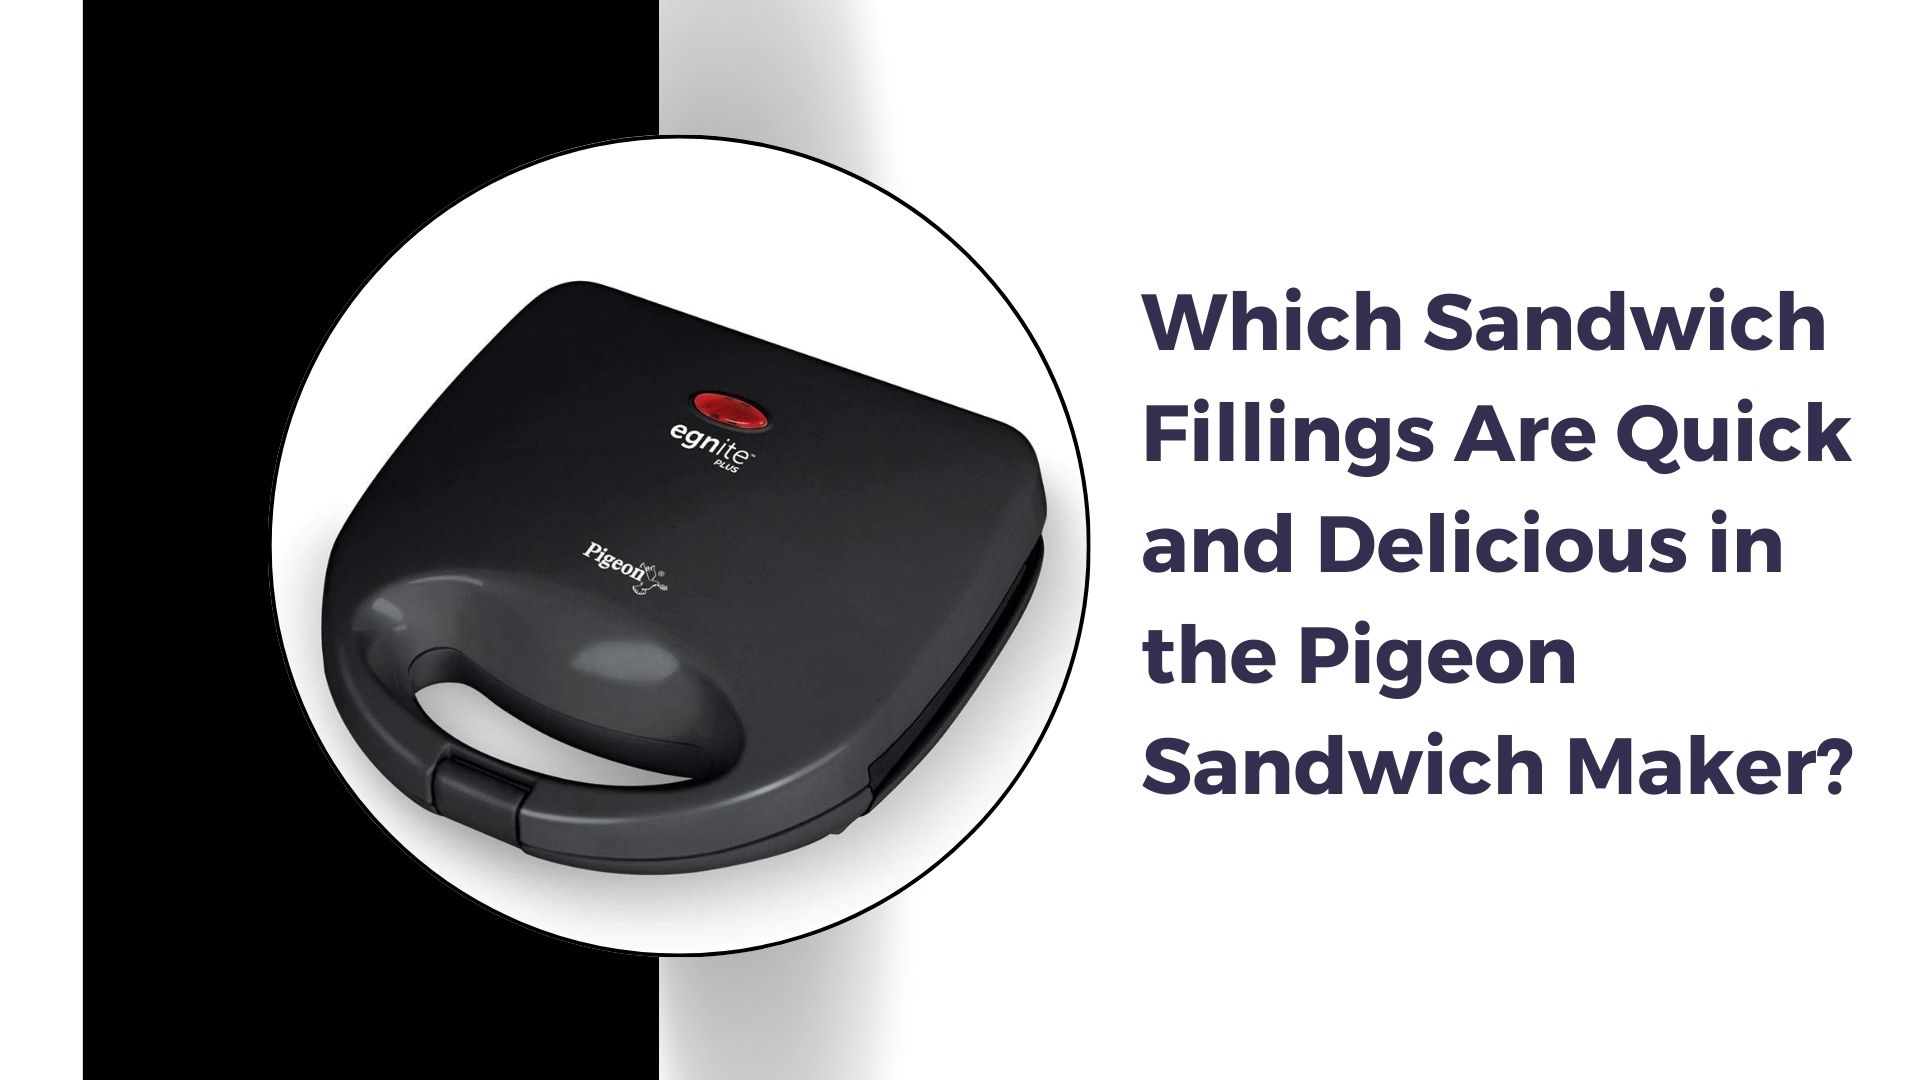 Which Sandwich Fillings Are Quick and Delicious in the Pigeon Sandwich Maker?